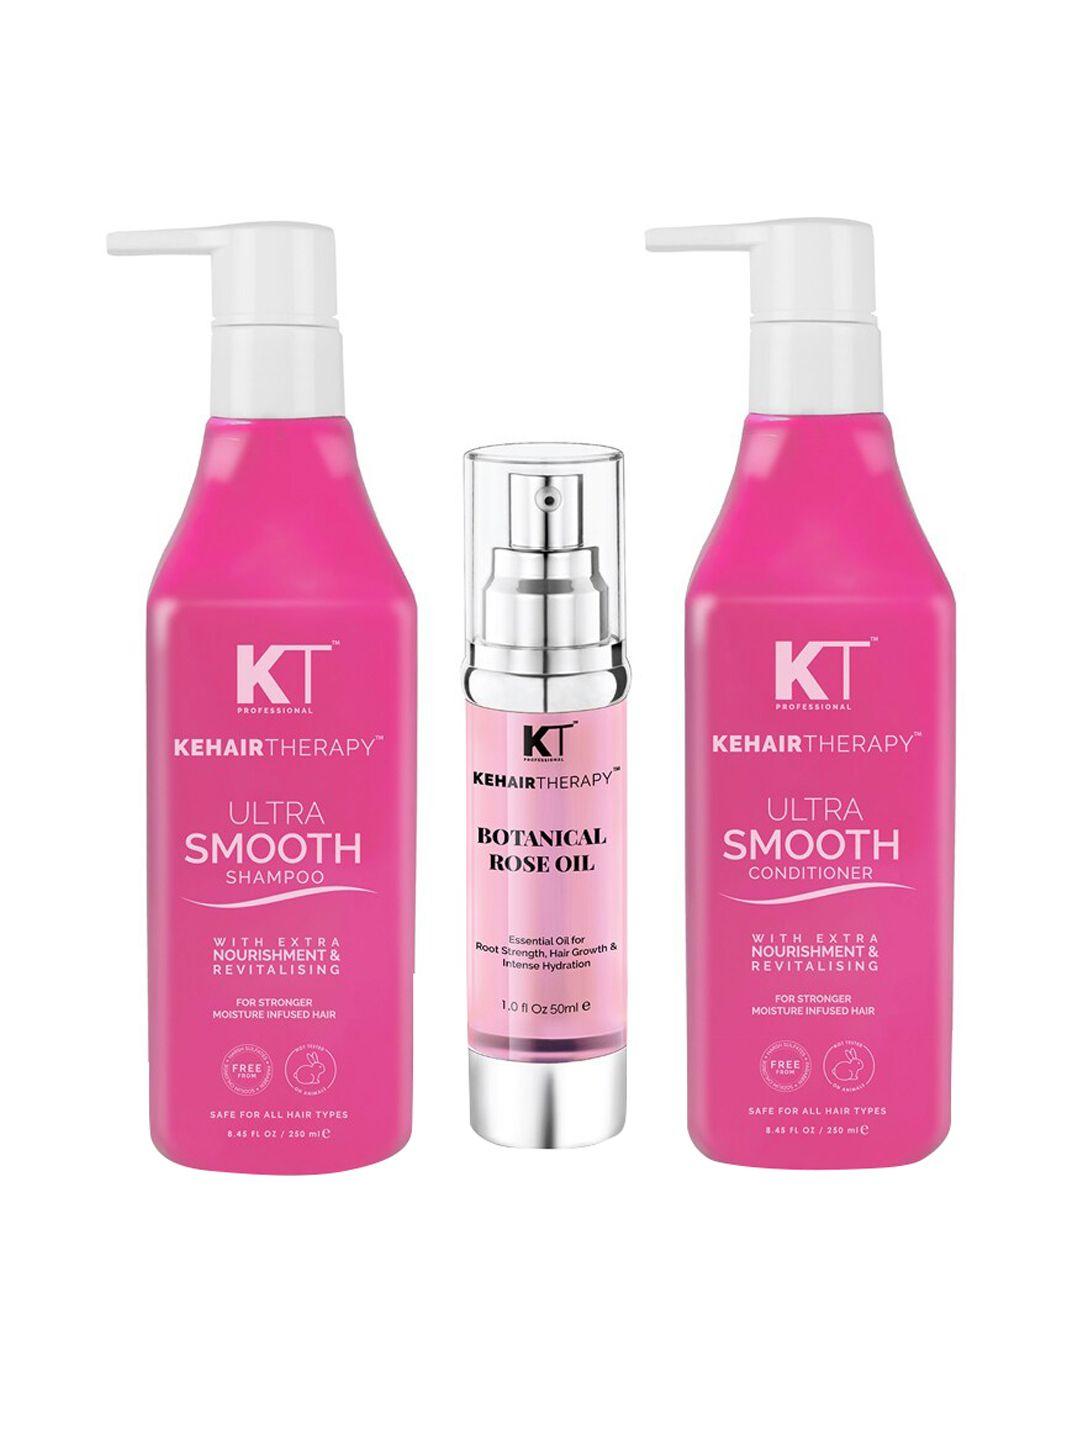 kehairtherapy set of 3 ultra smooth shampoo & conditioner with serum 550ml